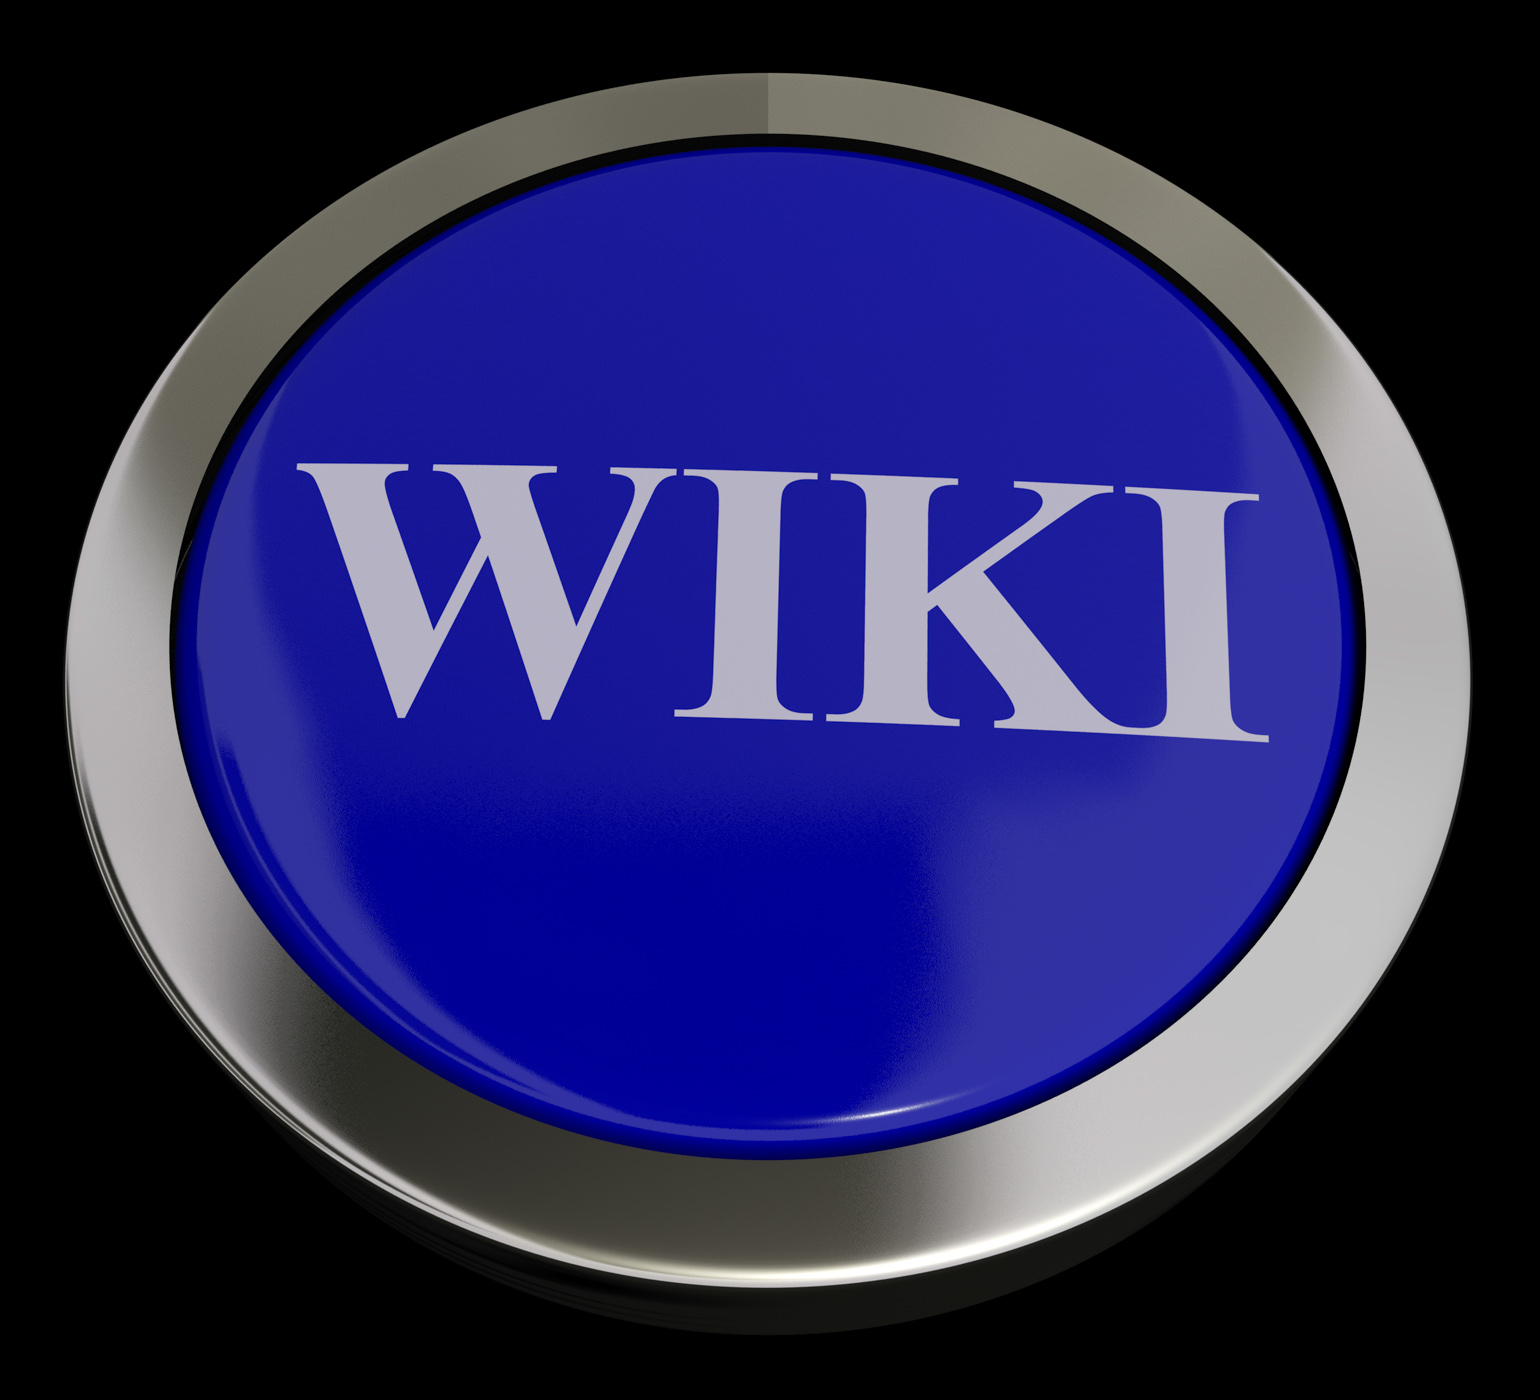 Wiki button for online information or encyclopedia photo